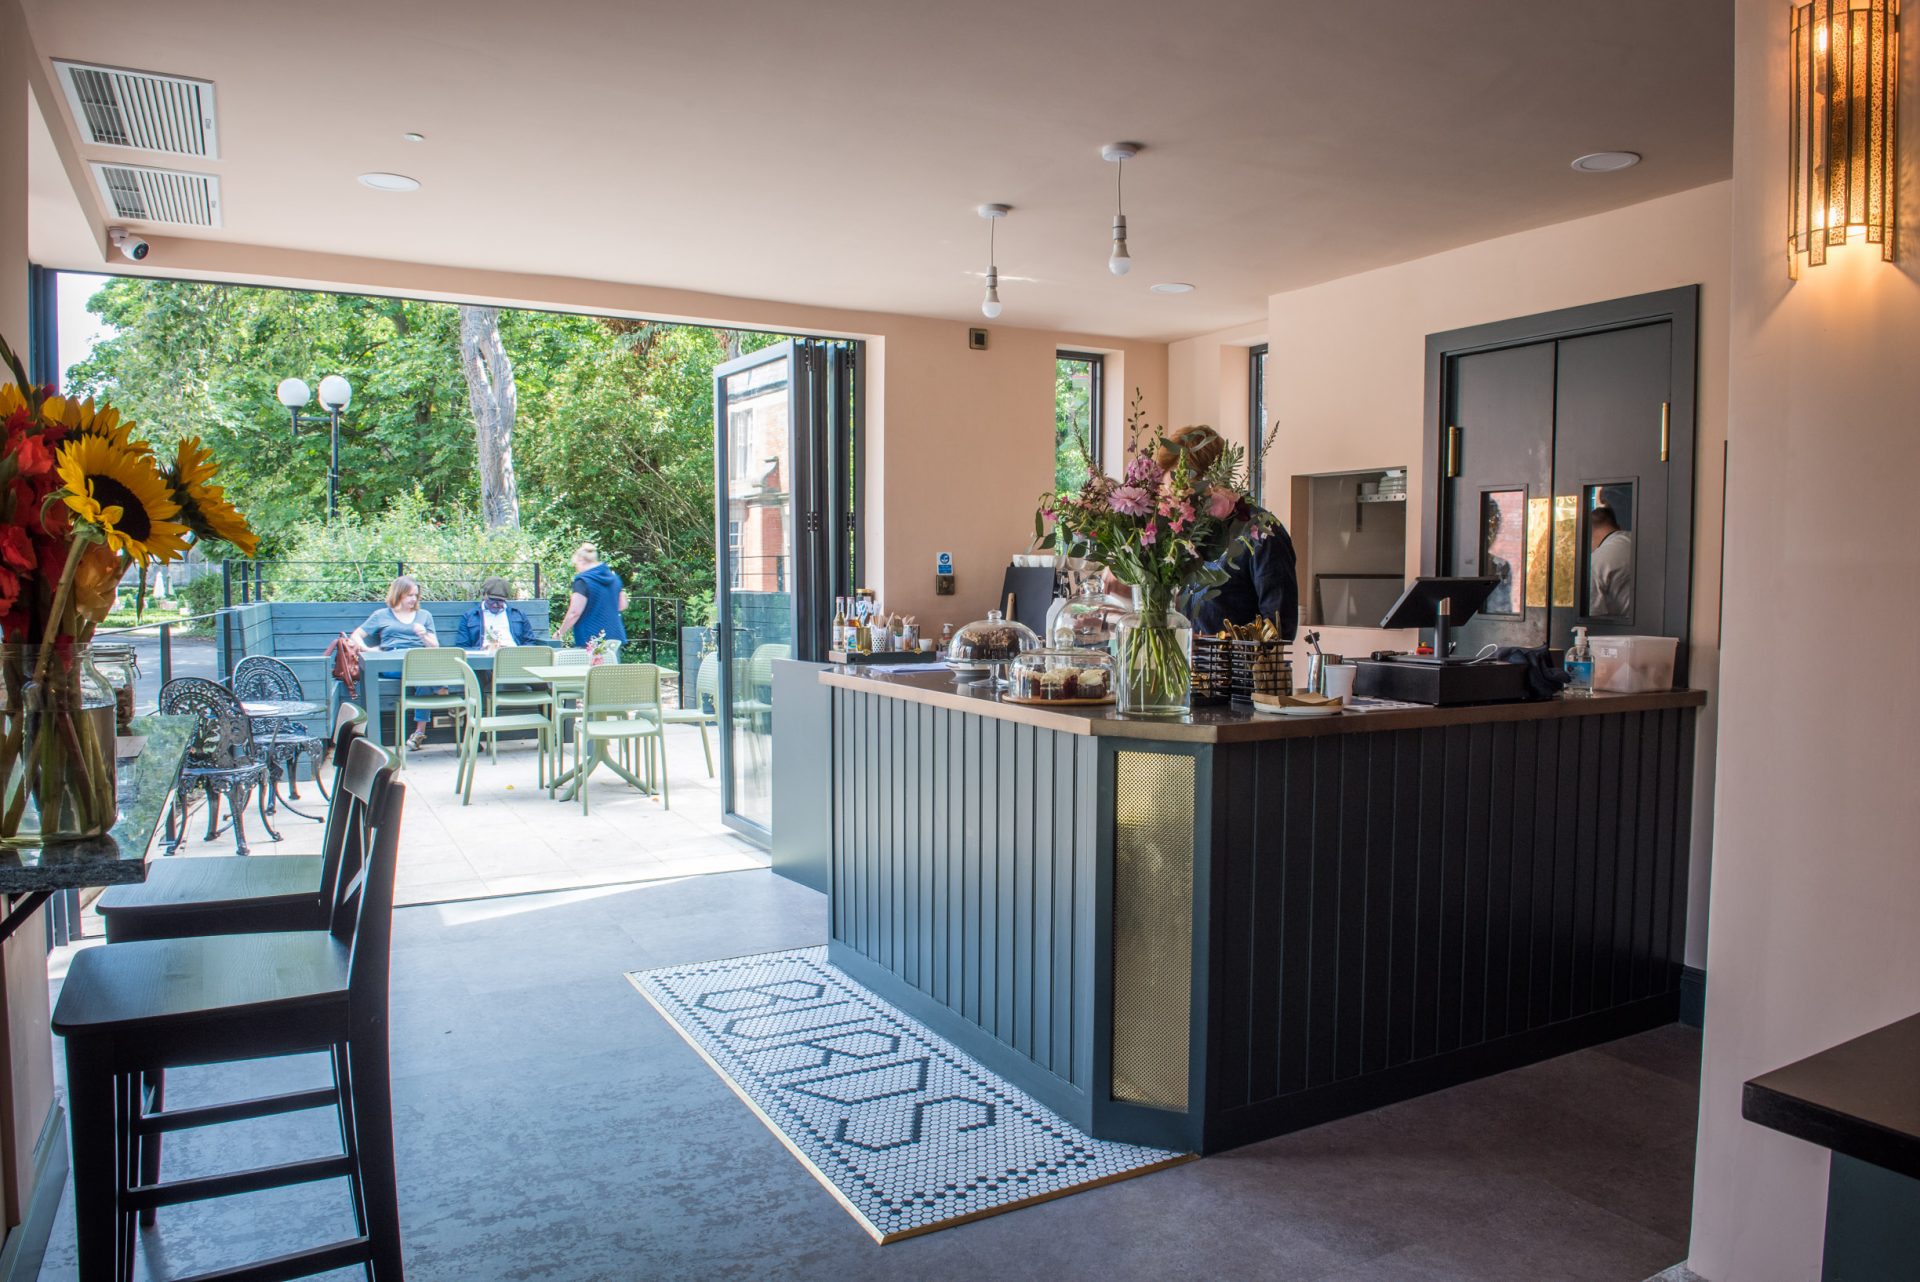 A new building for a new venture: Burds opens at the Gatehouse